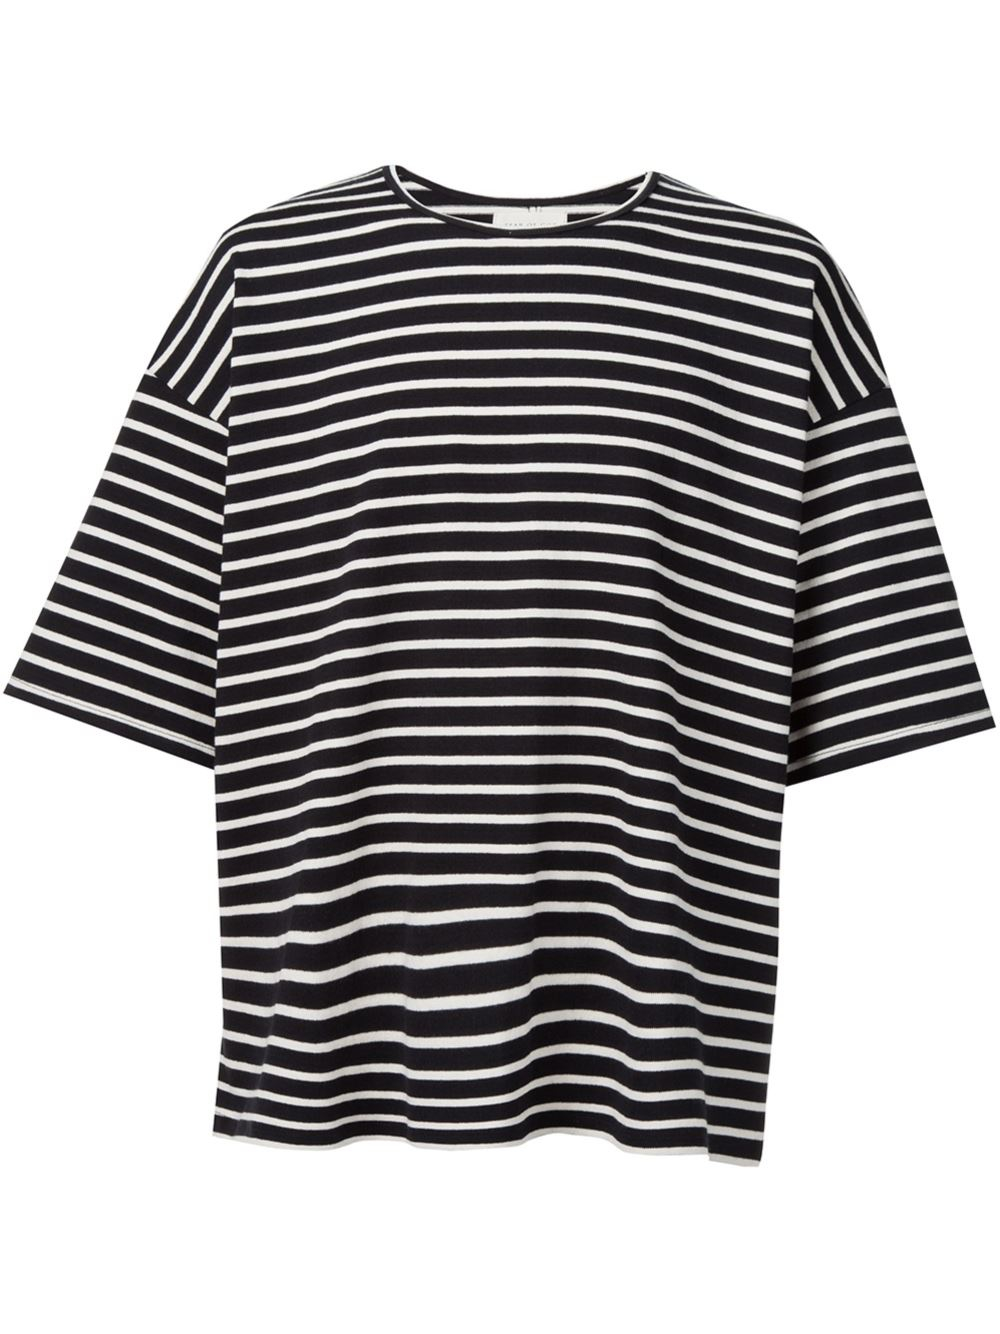 Lyst - Fear Of God 4th Collection Striped T-shirt in Black for Men